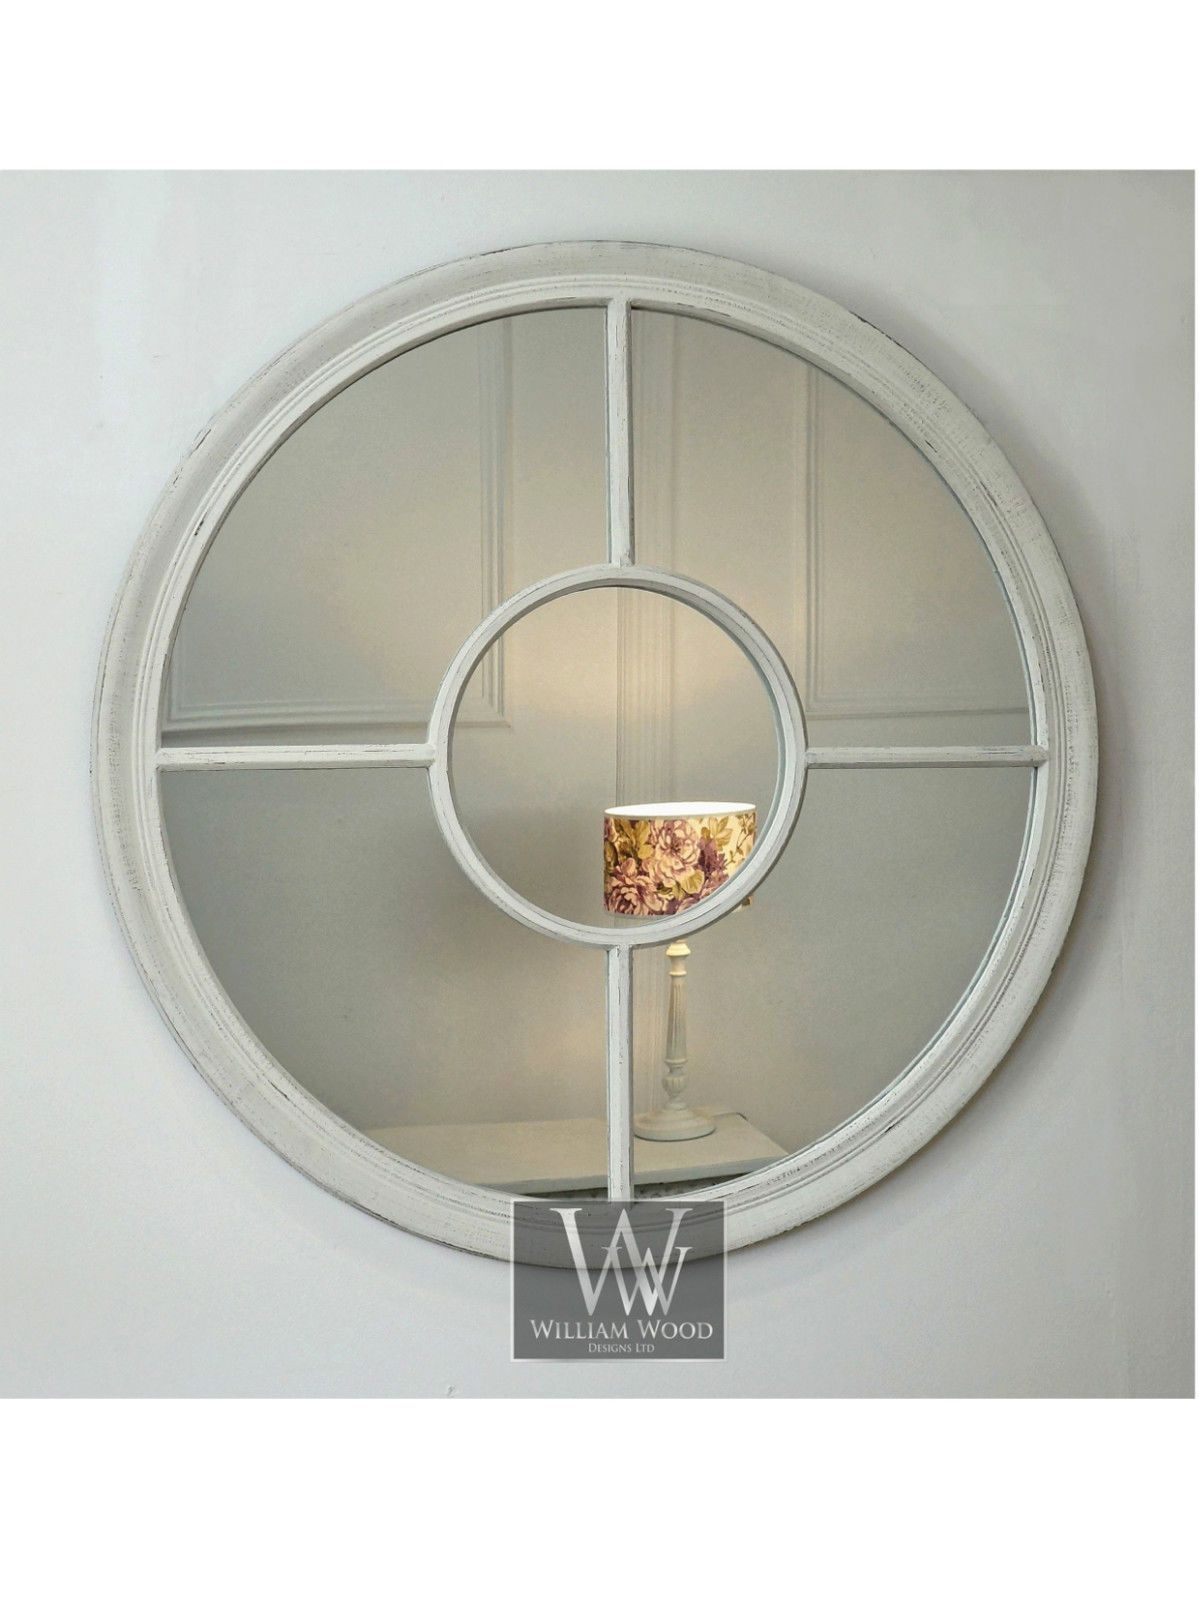 Rennes White Shabby Chic Round Window Wall Mirror 28" X 28" Large Intended For Stitch White Round Wall Mirrors (View 4 of 15)